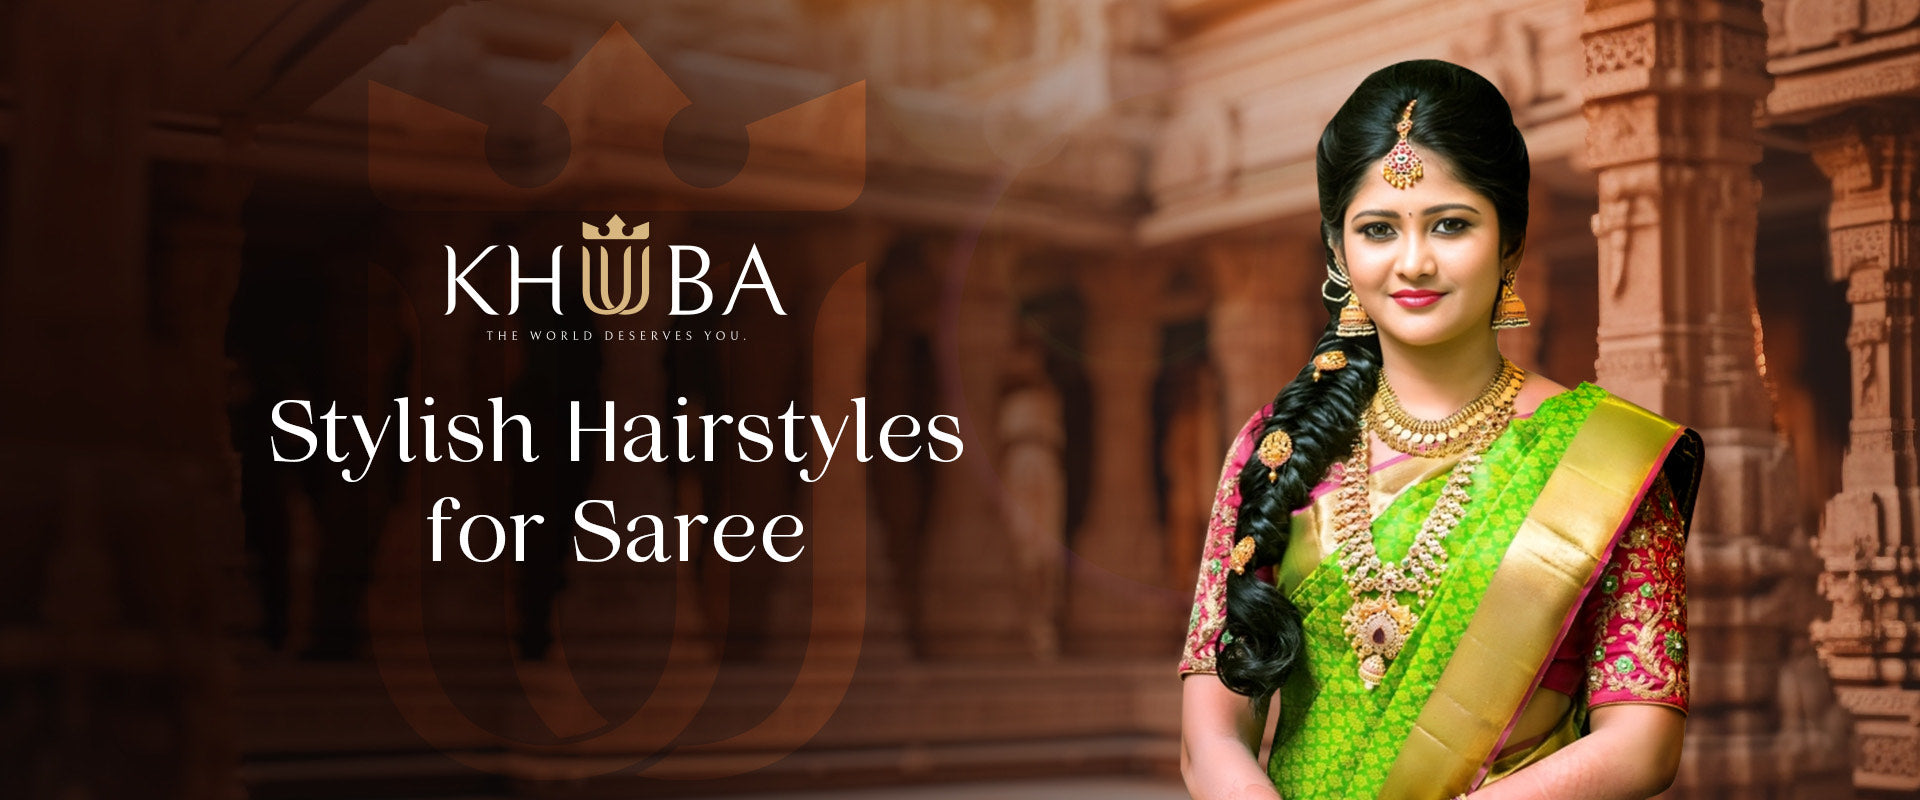 Hairstyles for saree